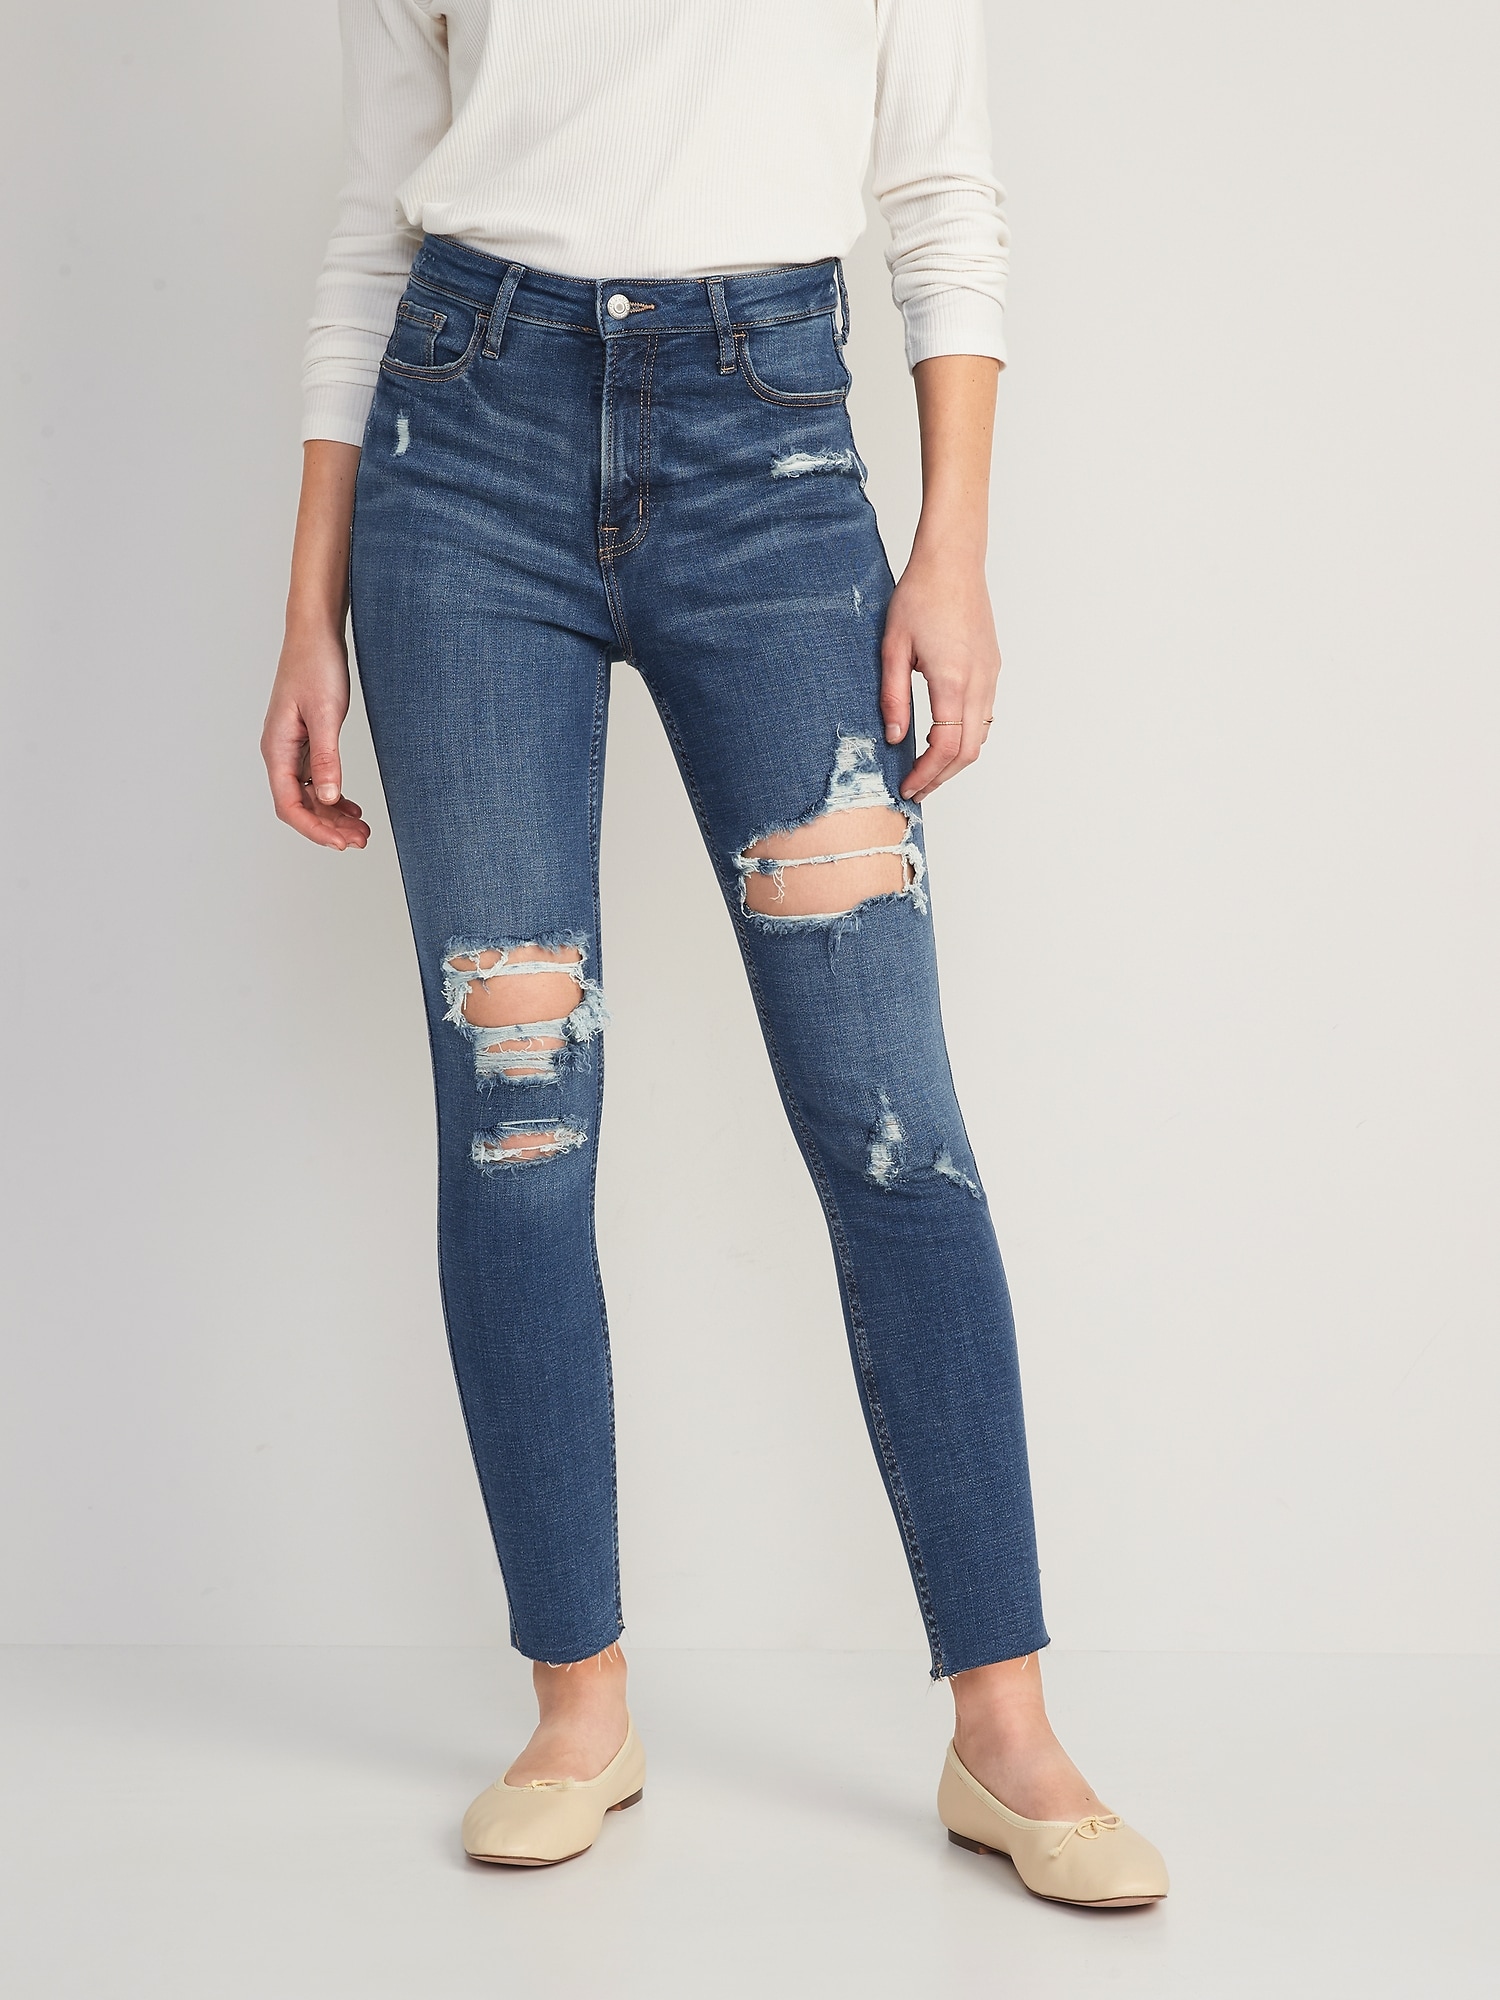 Women's Ripped Jeans | American Eagle